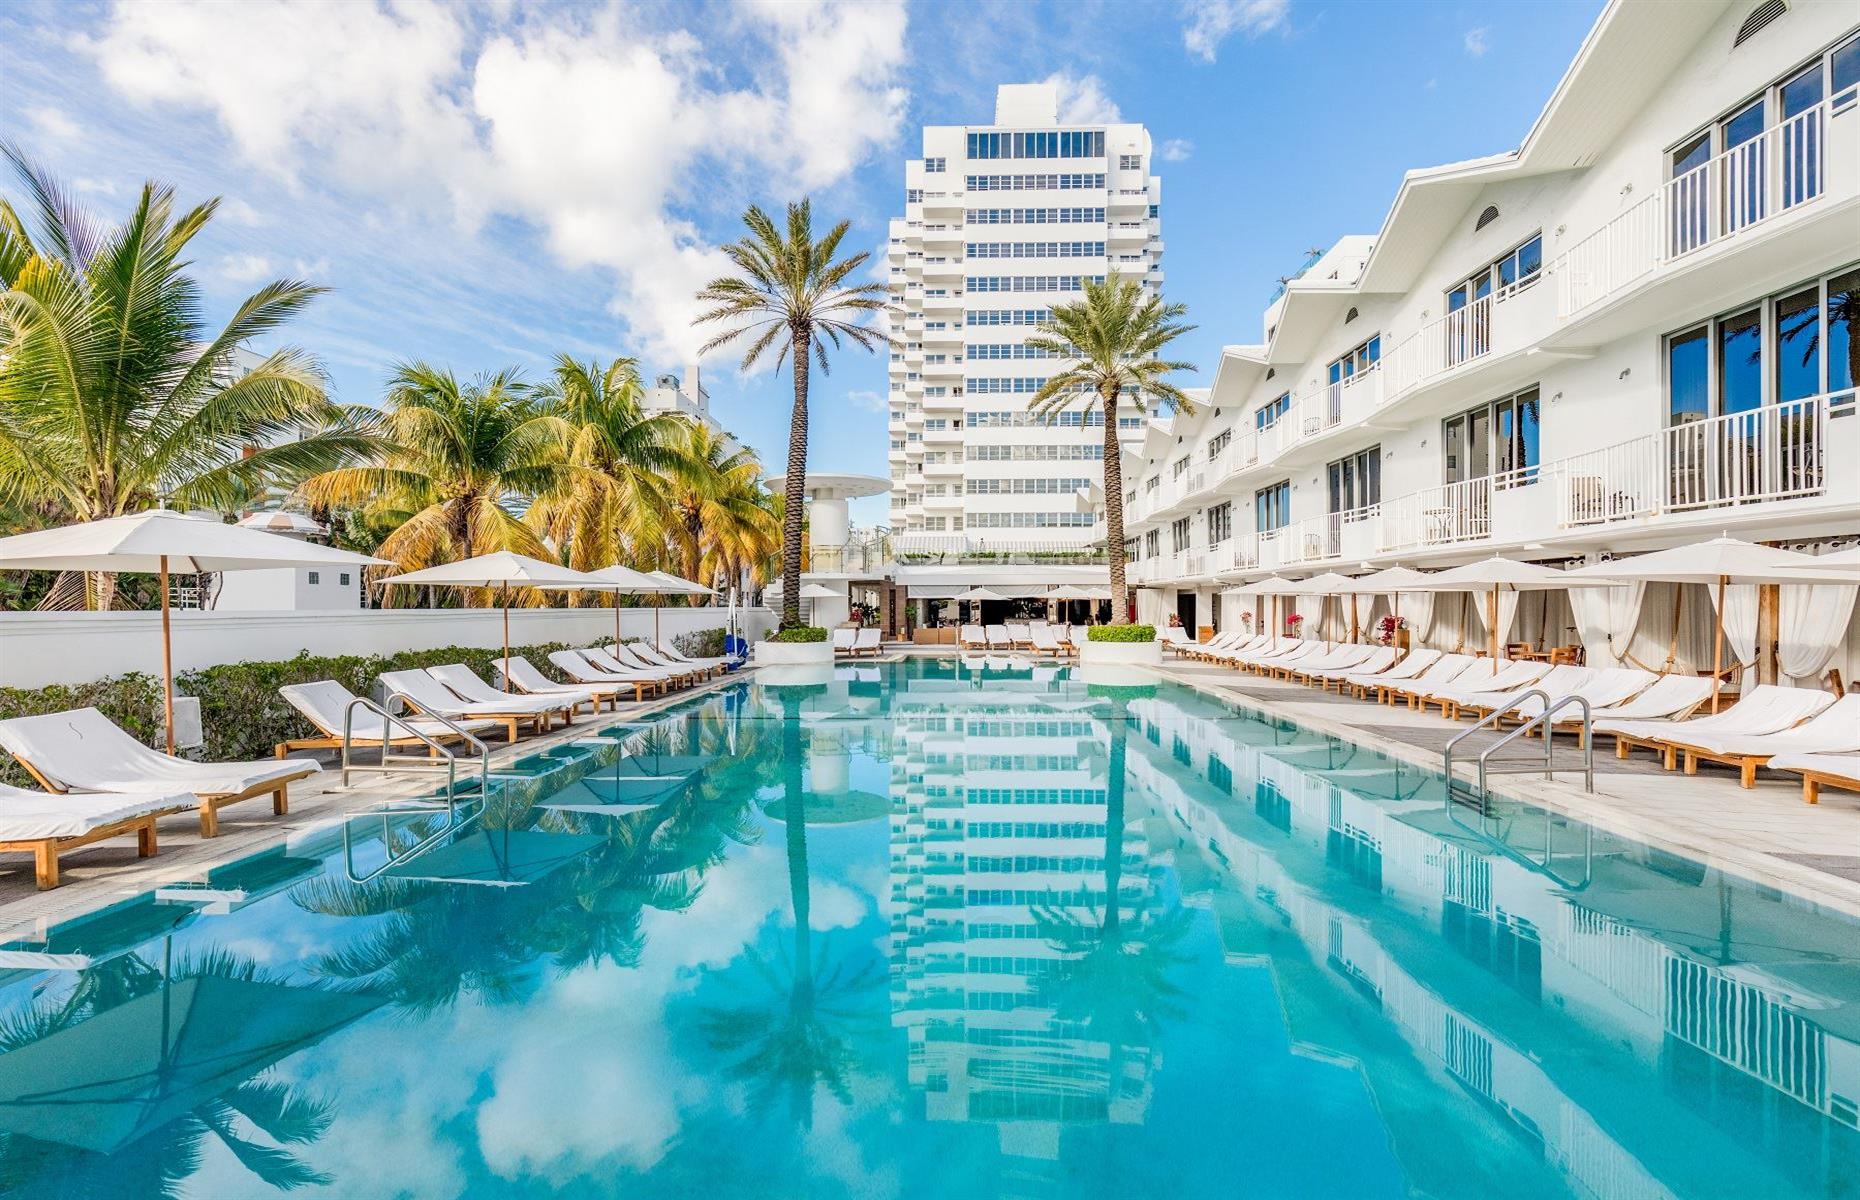 <p>Another of Miami’s historic beachside playgrounds, <a href="https://www.shelborne.com">Shelborne South Beach</a> was the work of architect Igor Polevitsky. It has all the hallmarks of the era: an all-white facade, Terrazzo flooring, a centerpiece pool and a ballroom for lavish parties. It was used as a venue for the Miss USA Pageant in the 1940s. After a recent multi-million dollar remodel, the oceanfront landmark is back to its glory days with a fresh retro-chic feel. There's a new beach club, destination restaurants and an elegant pool area complete with the original diving dock.</p>